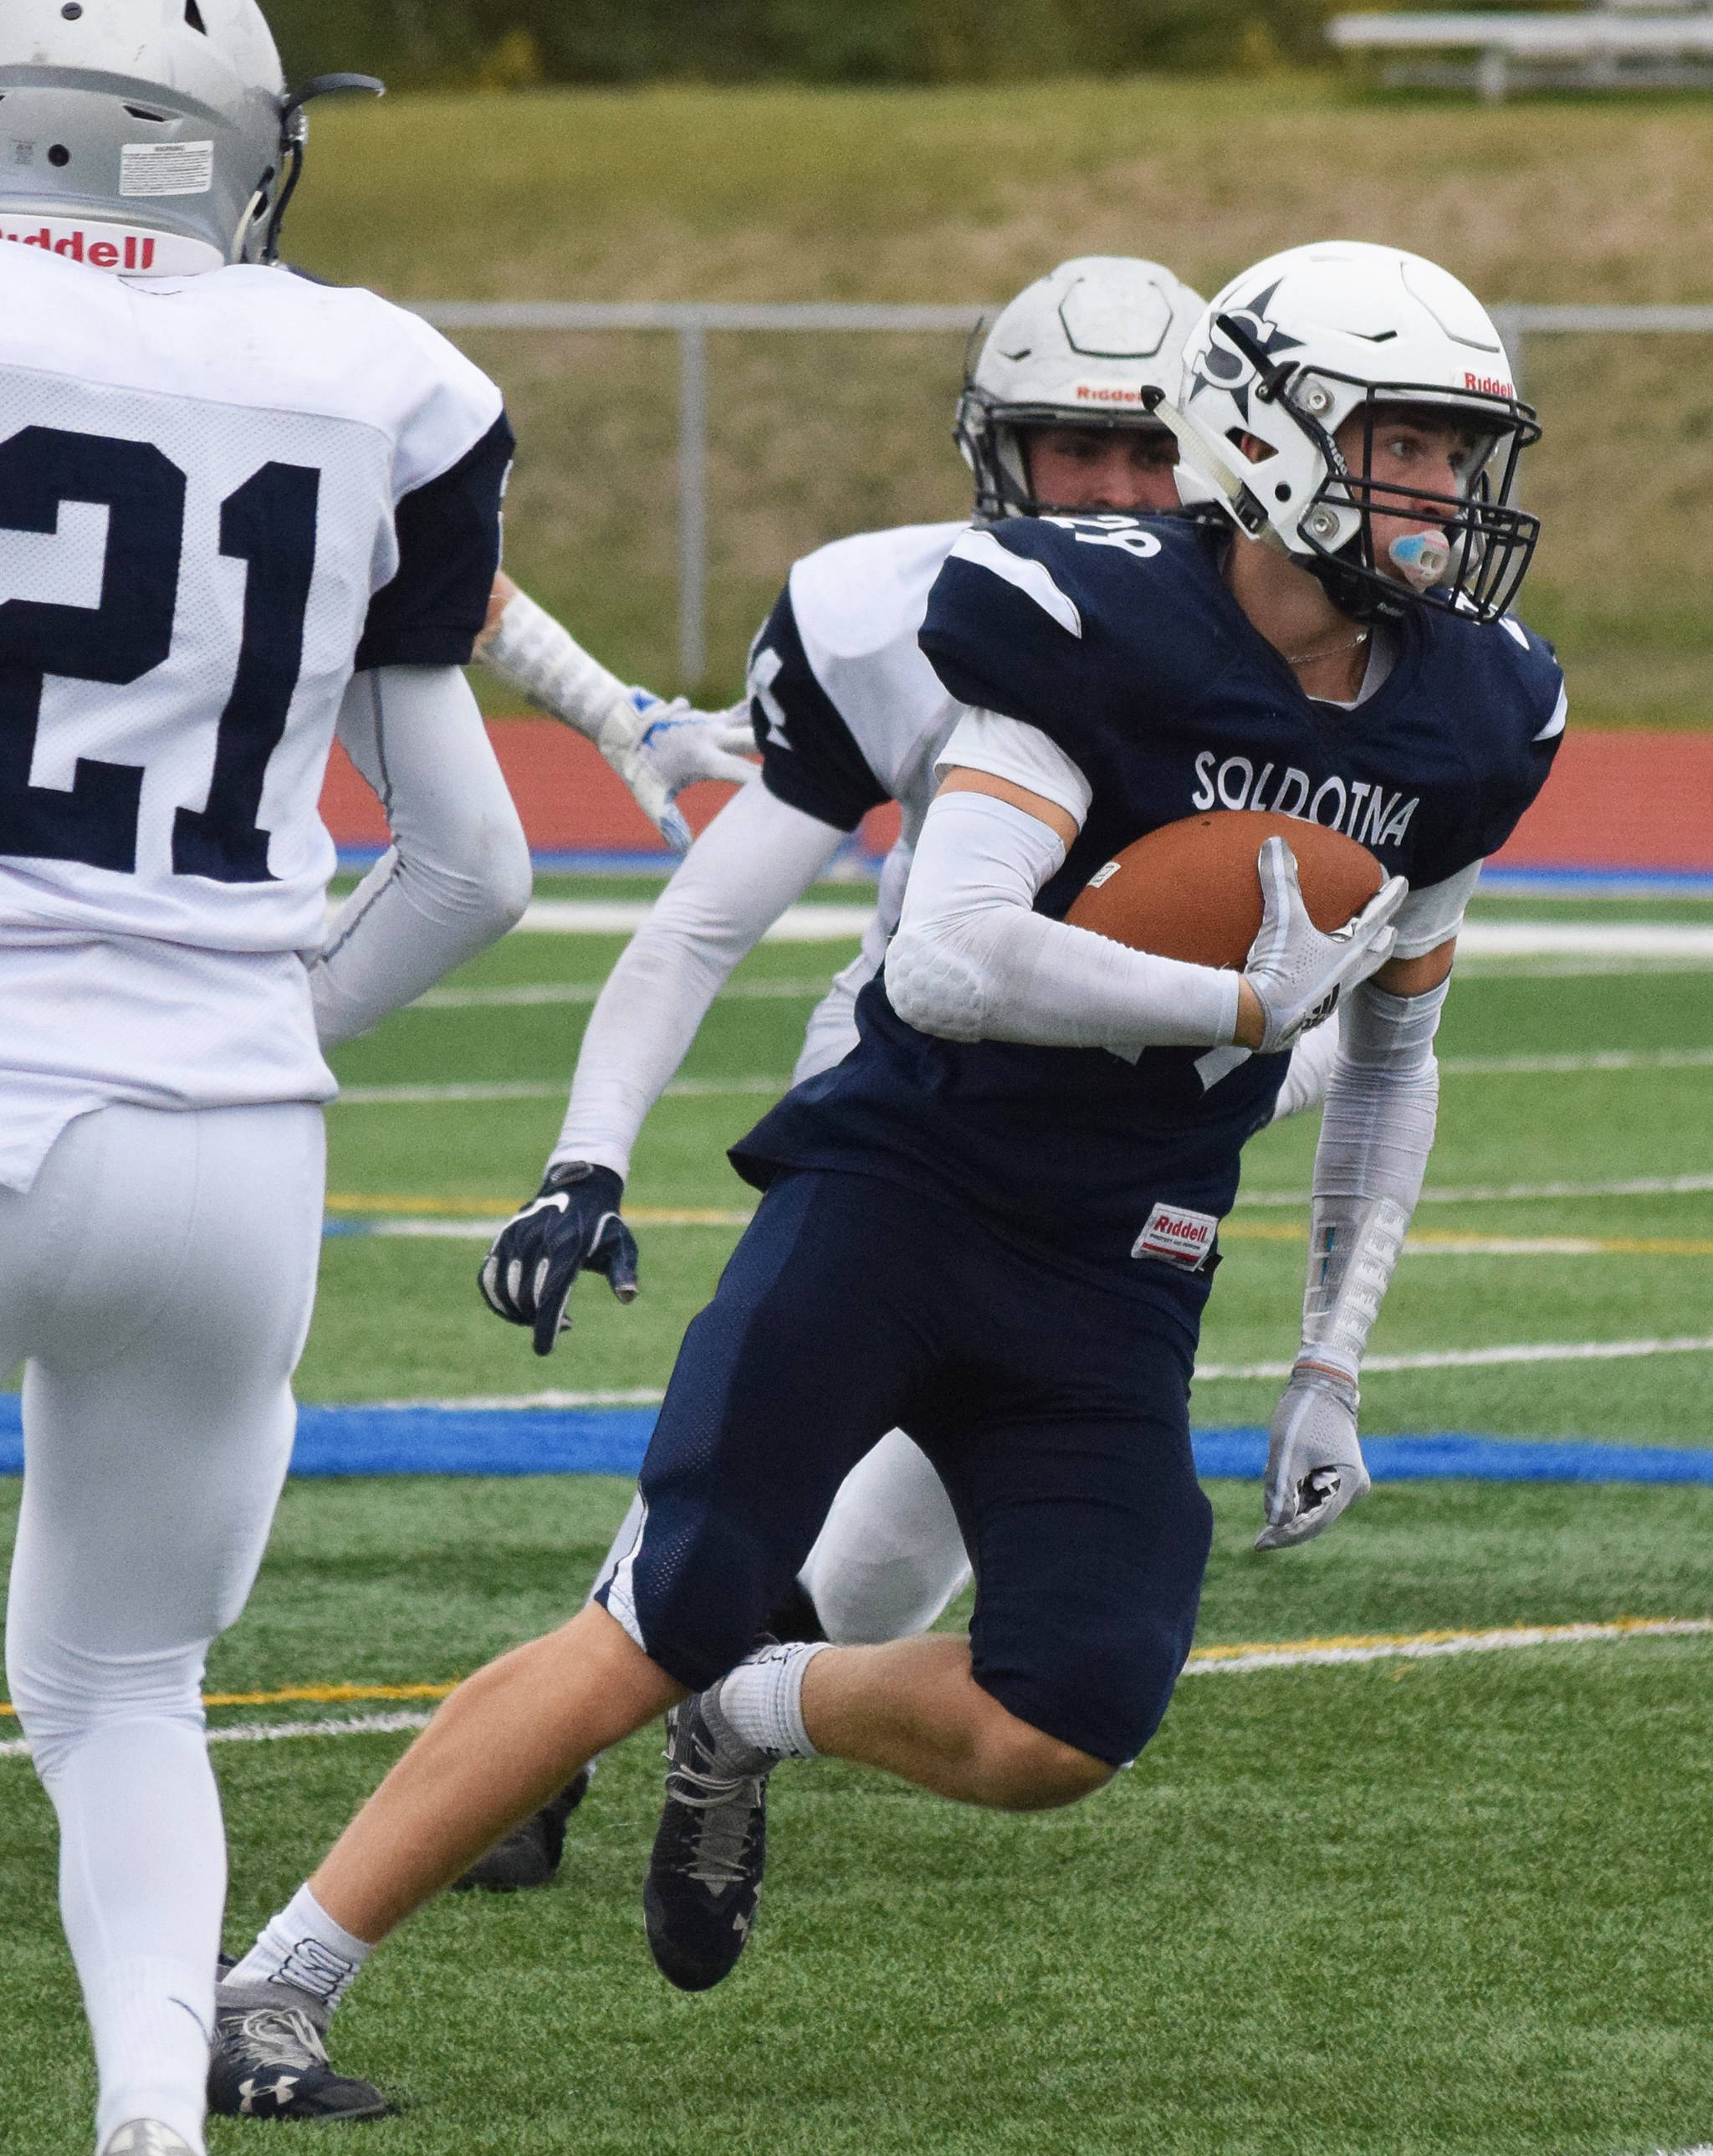 Soldotna’s Tyler Morrison runs the ball back after intercepting Eagle River quarterback Nathaniel Guderian, Saturday, Sept. 28, 2019, against Eagle River at Justin Maile Field in Soldotna. (Photo by Joey Klecka/Peninsula Clarion)